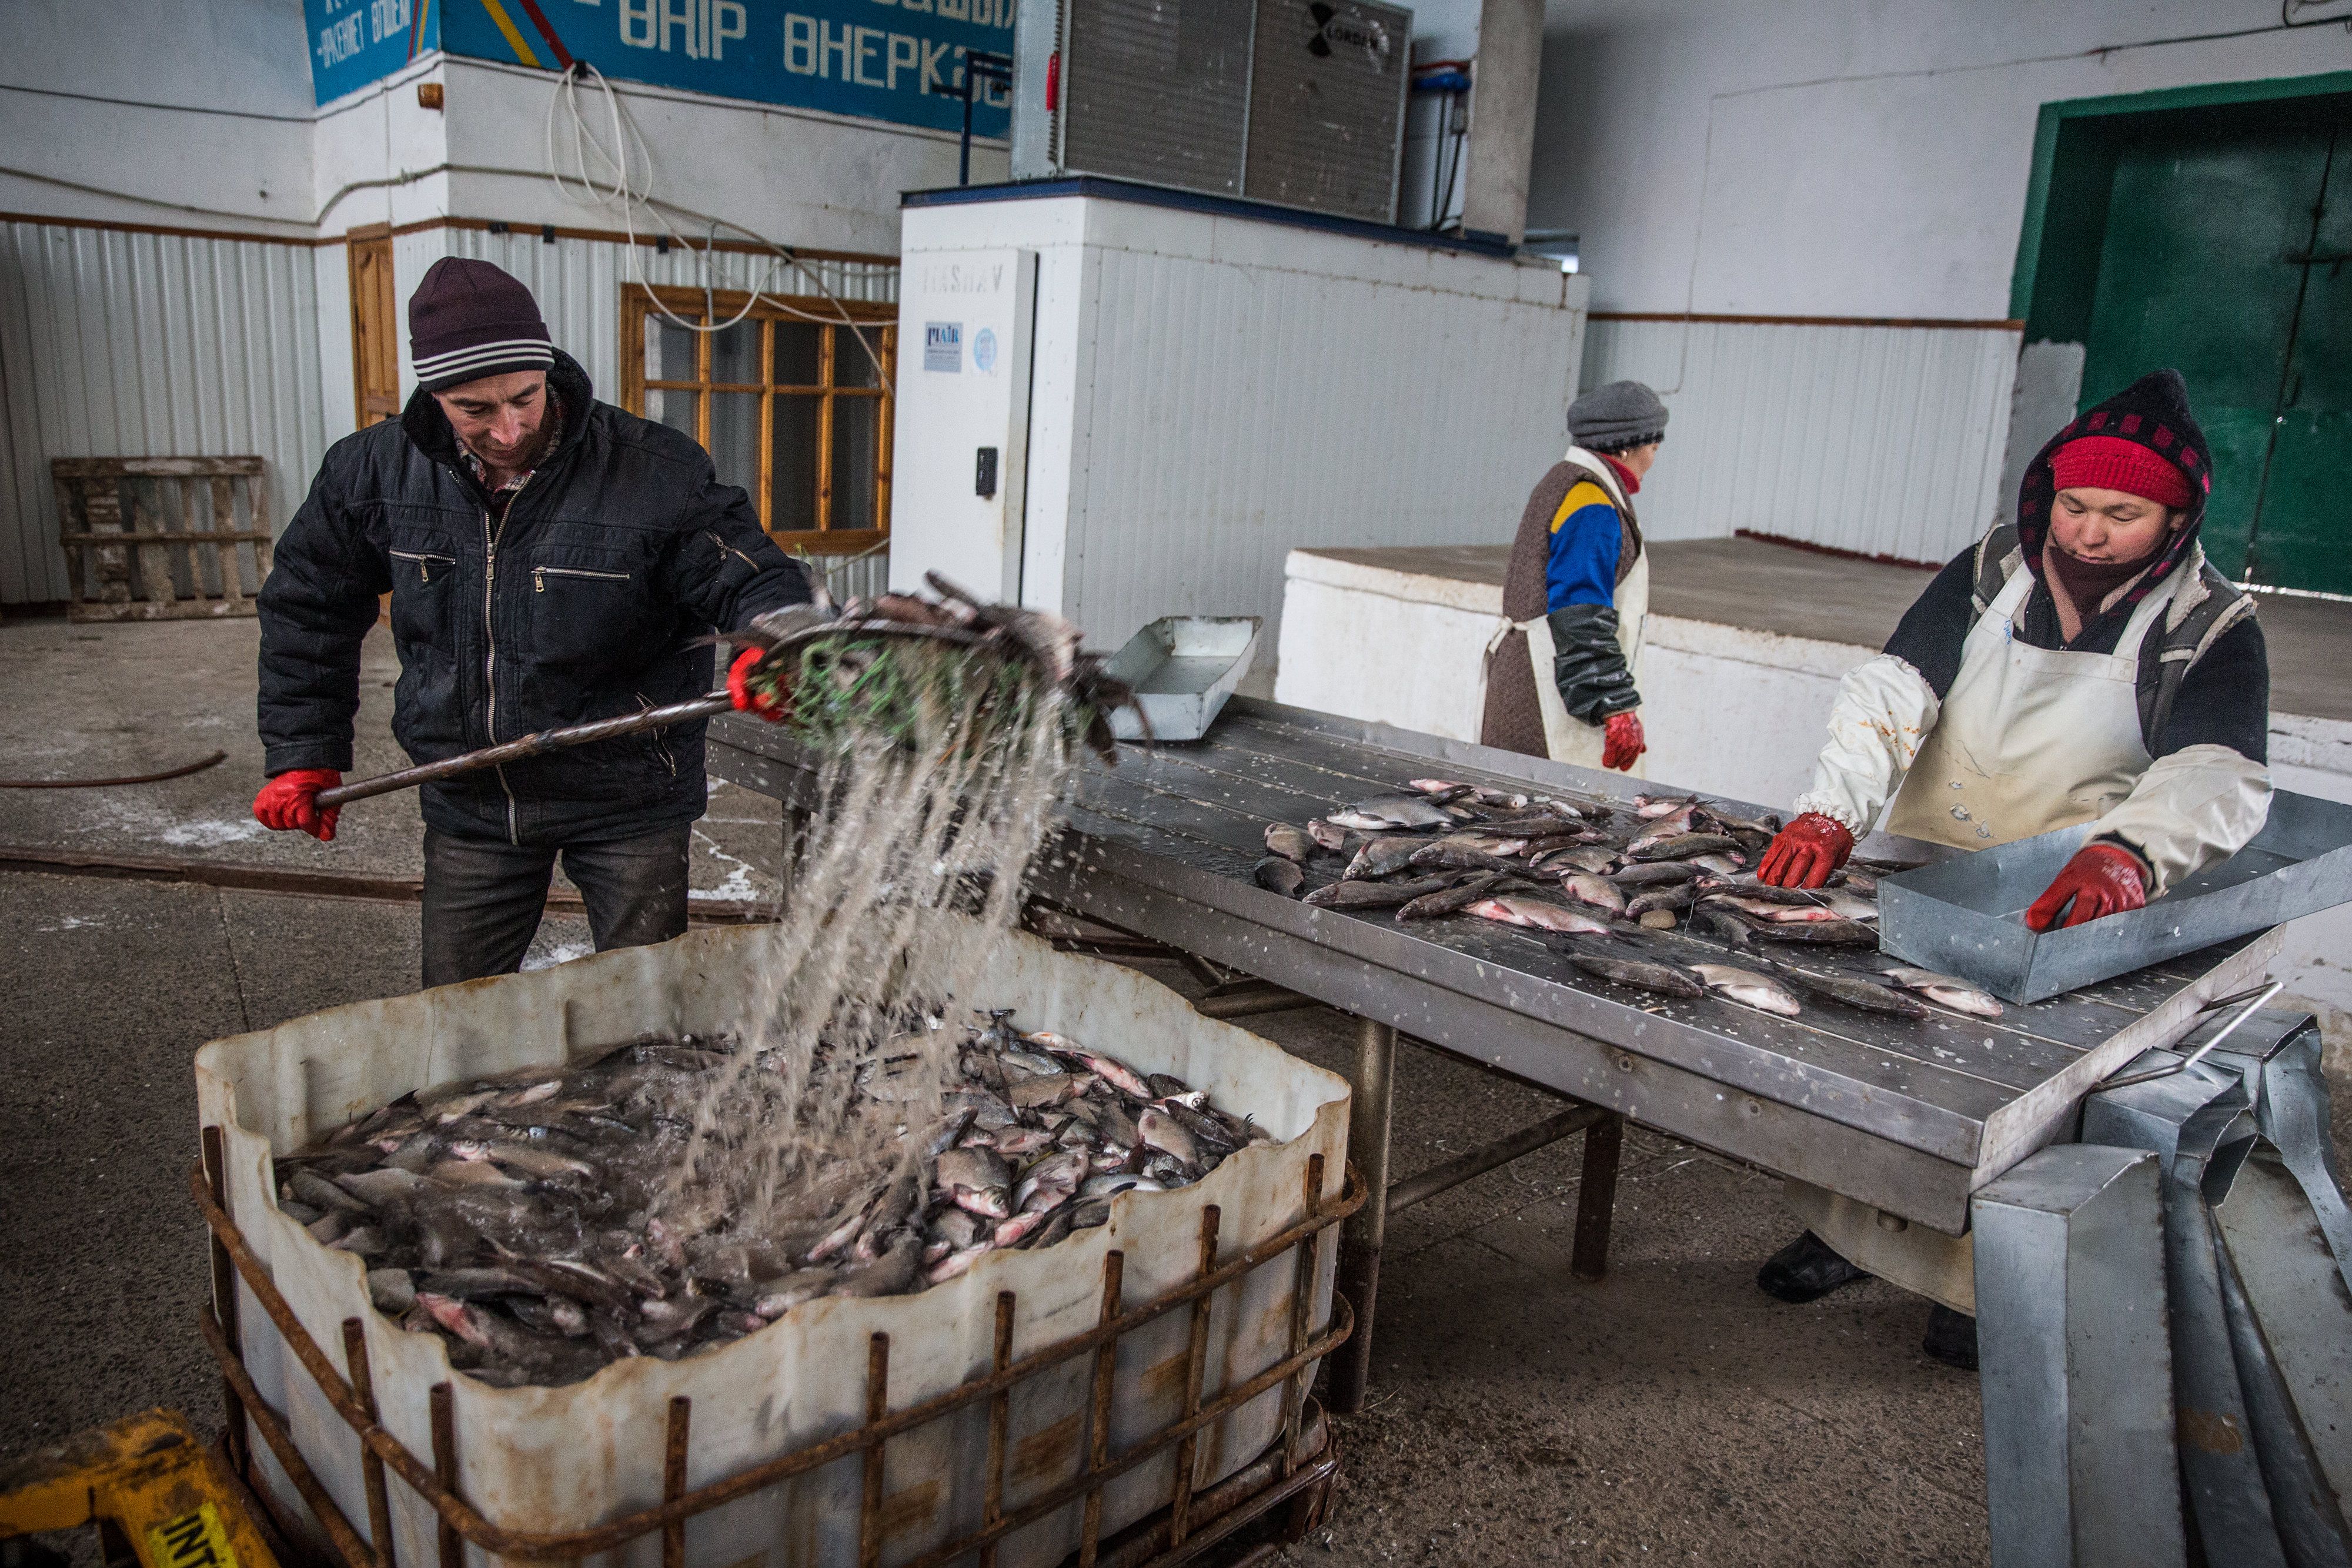 Workers process fish at a plant in Aralsk, Kazakhstan. Image by Taylor Weidman. Kazakhstan, 2017.